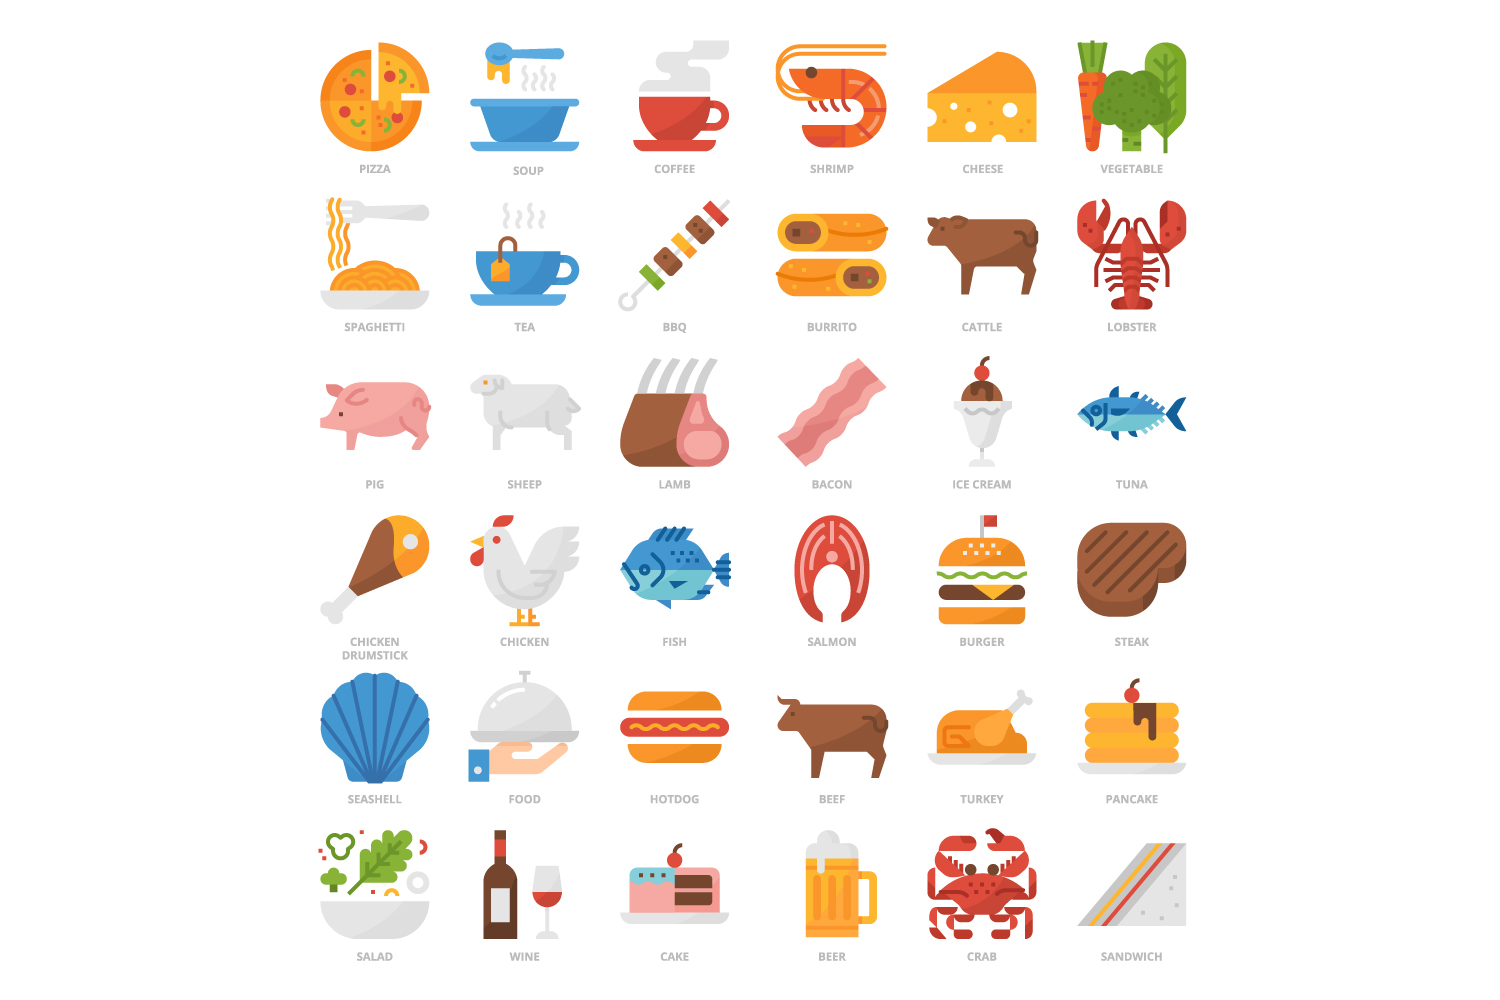 Poster with different types of food on it.